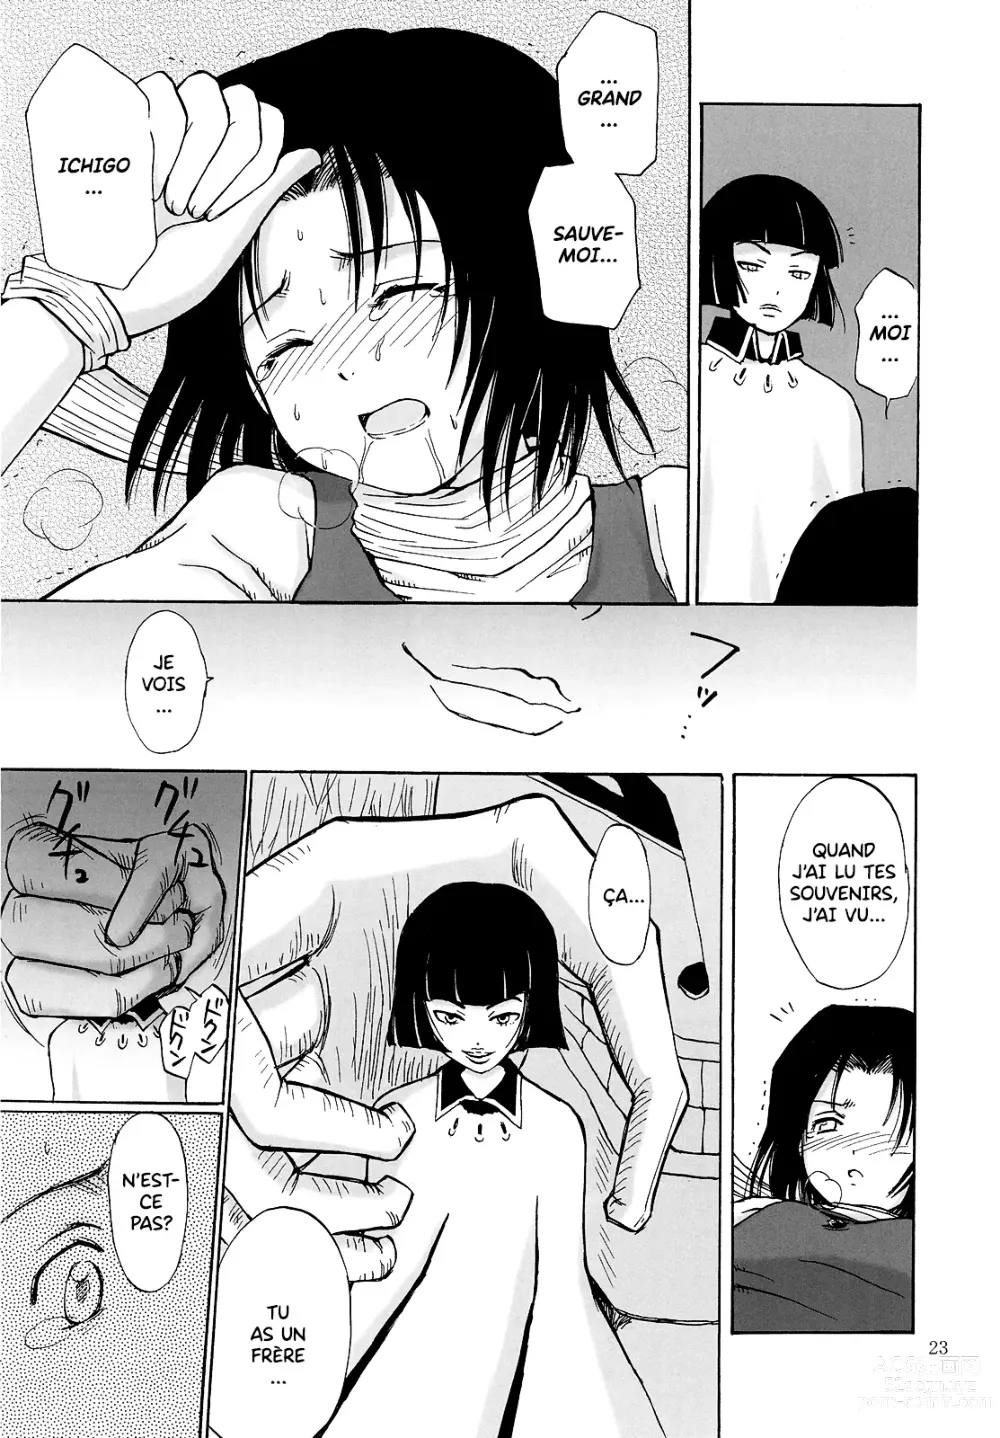 Page 23 of doujinshi OTHERSIDE Kaiteiban